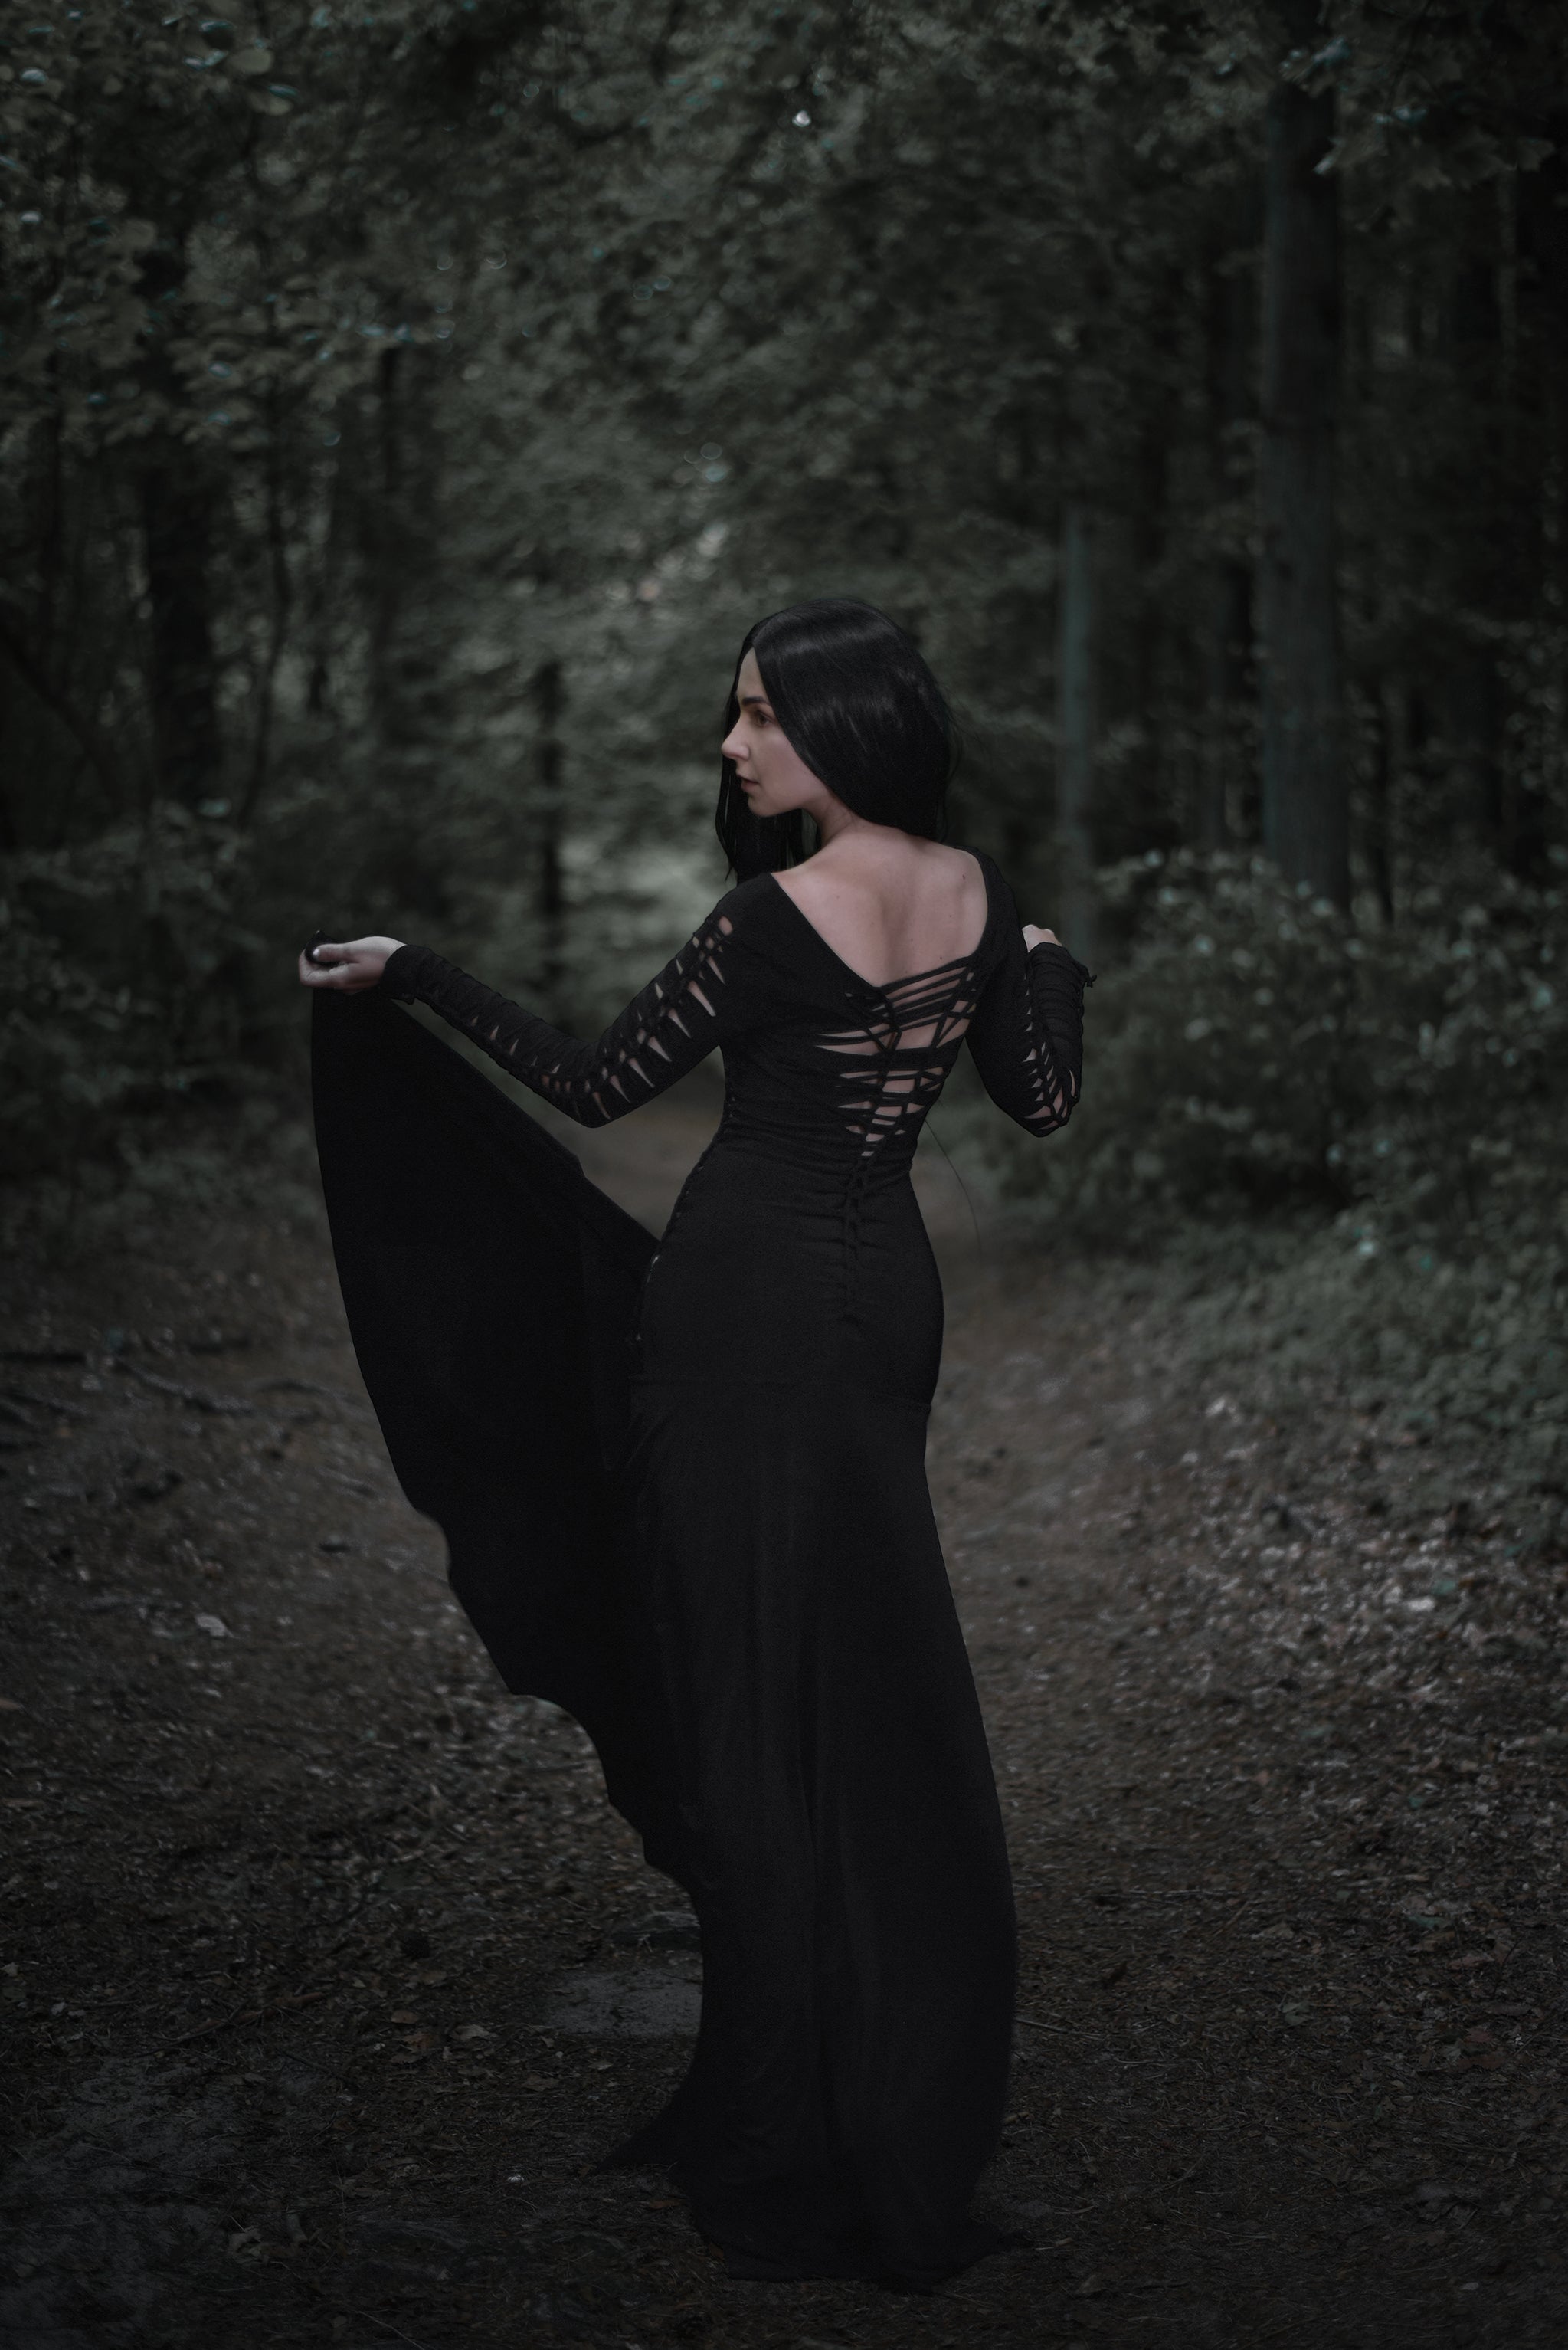 The Modern Morticia Gown - Goth Mall